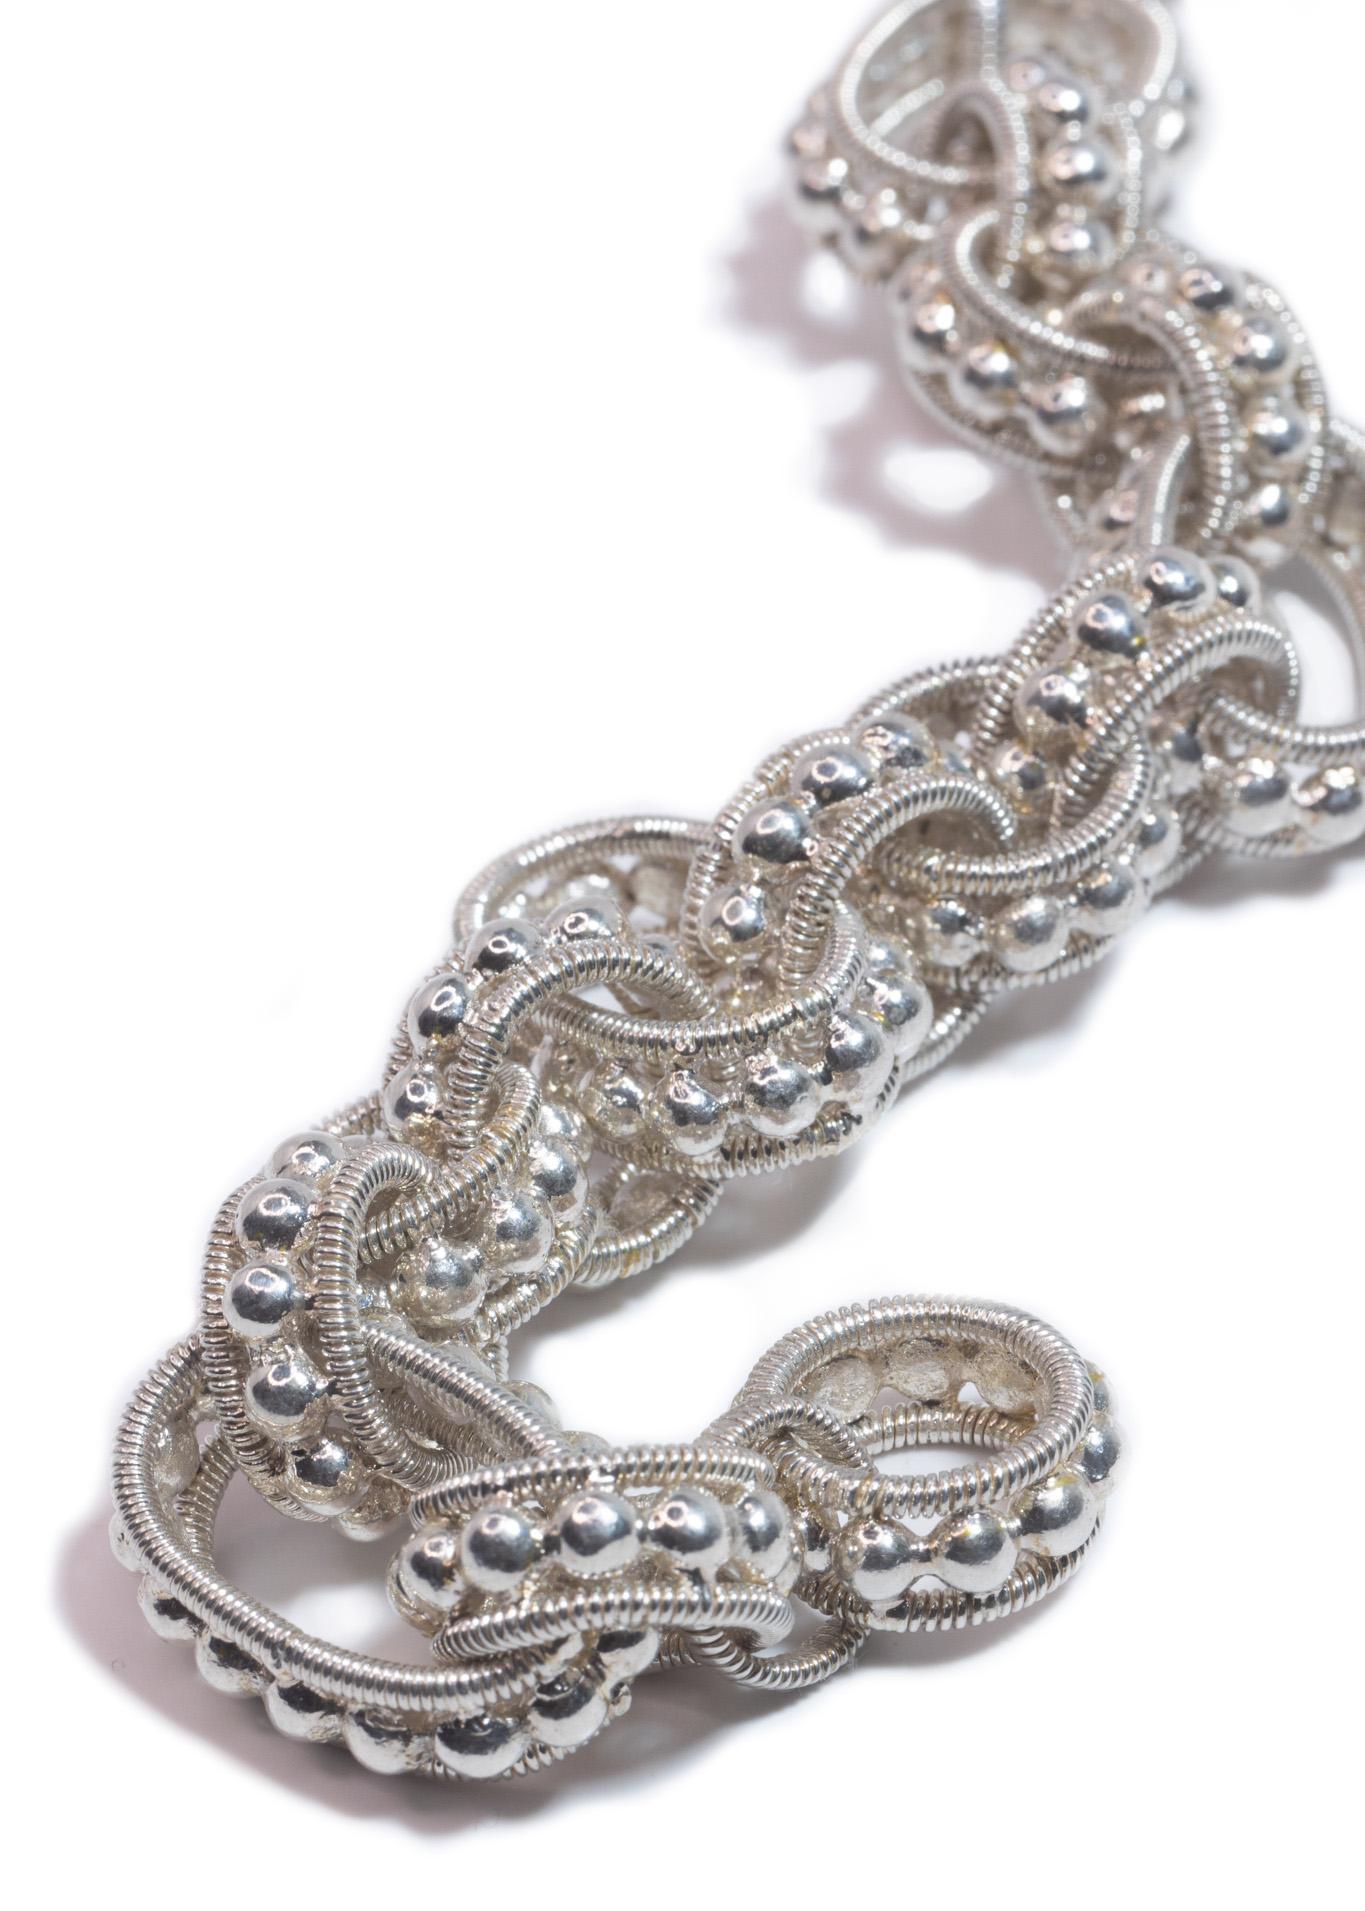 Intention: Glitz & Glam

Design: You're going to have fun jingling this argentium silver bracelet around town. The Awan bracelet has both oval and round links, each made up of small balls outlined with a tight spiral design.

Style Suggestion: Layer